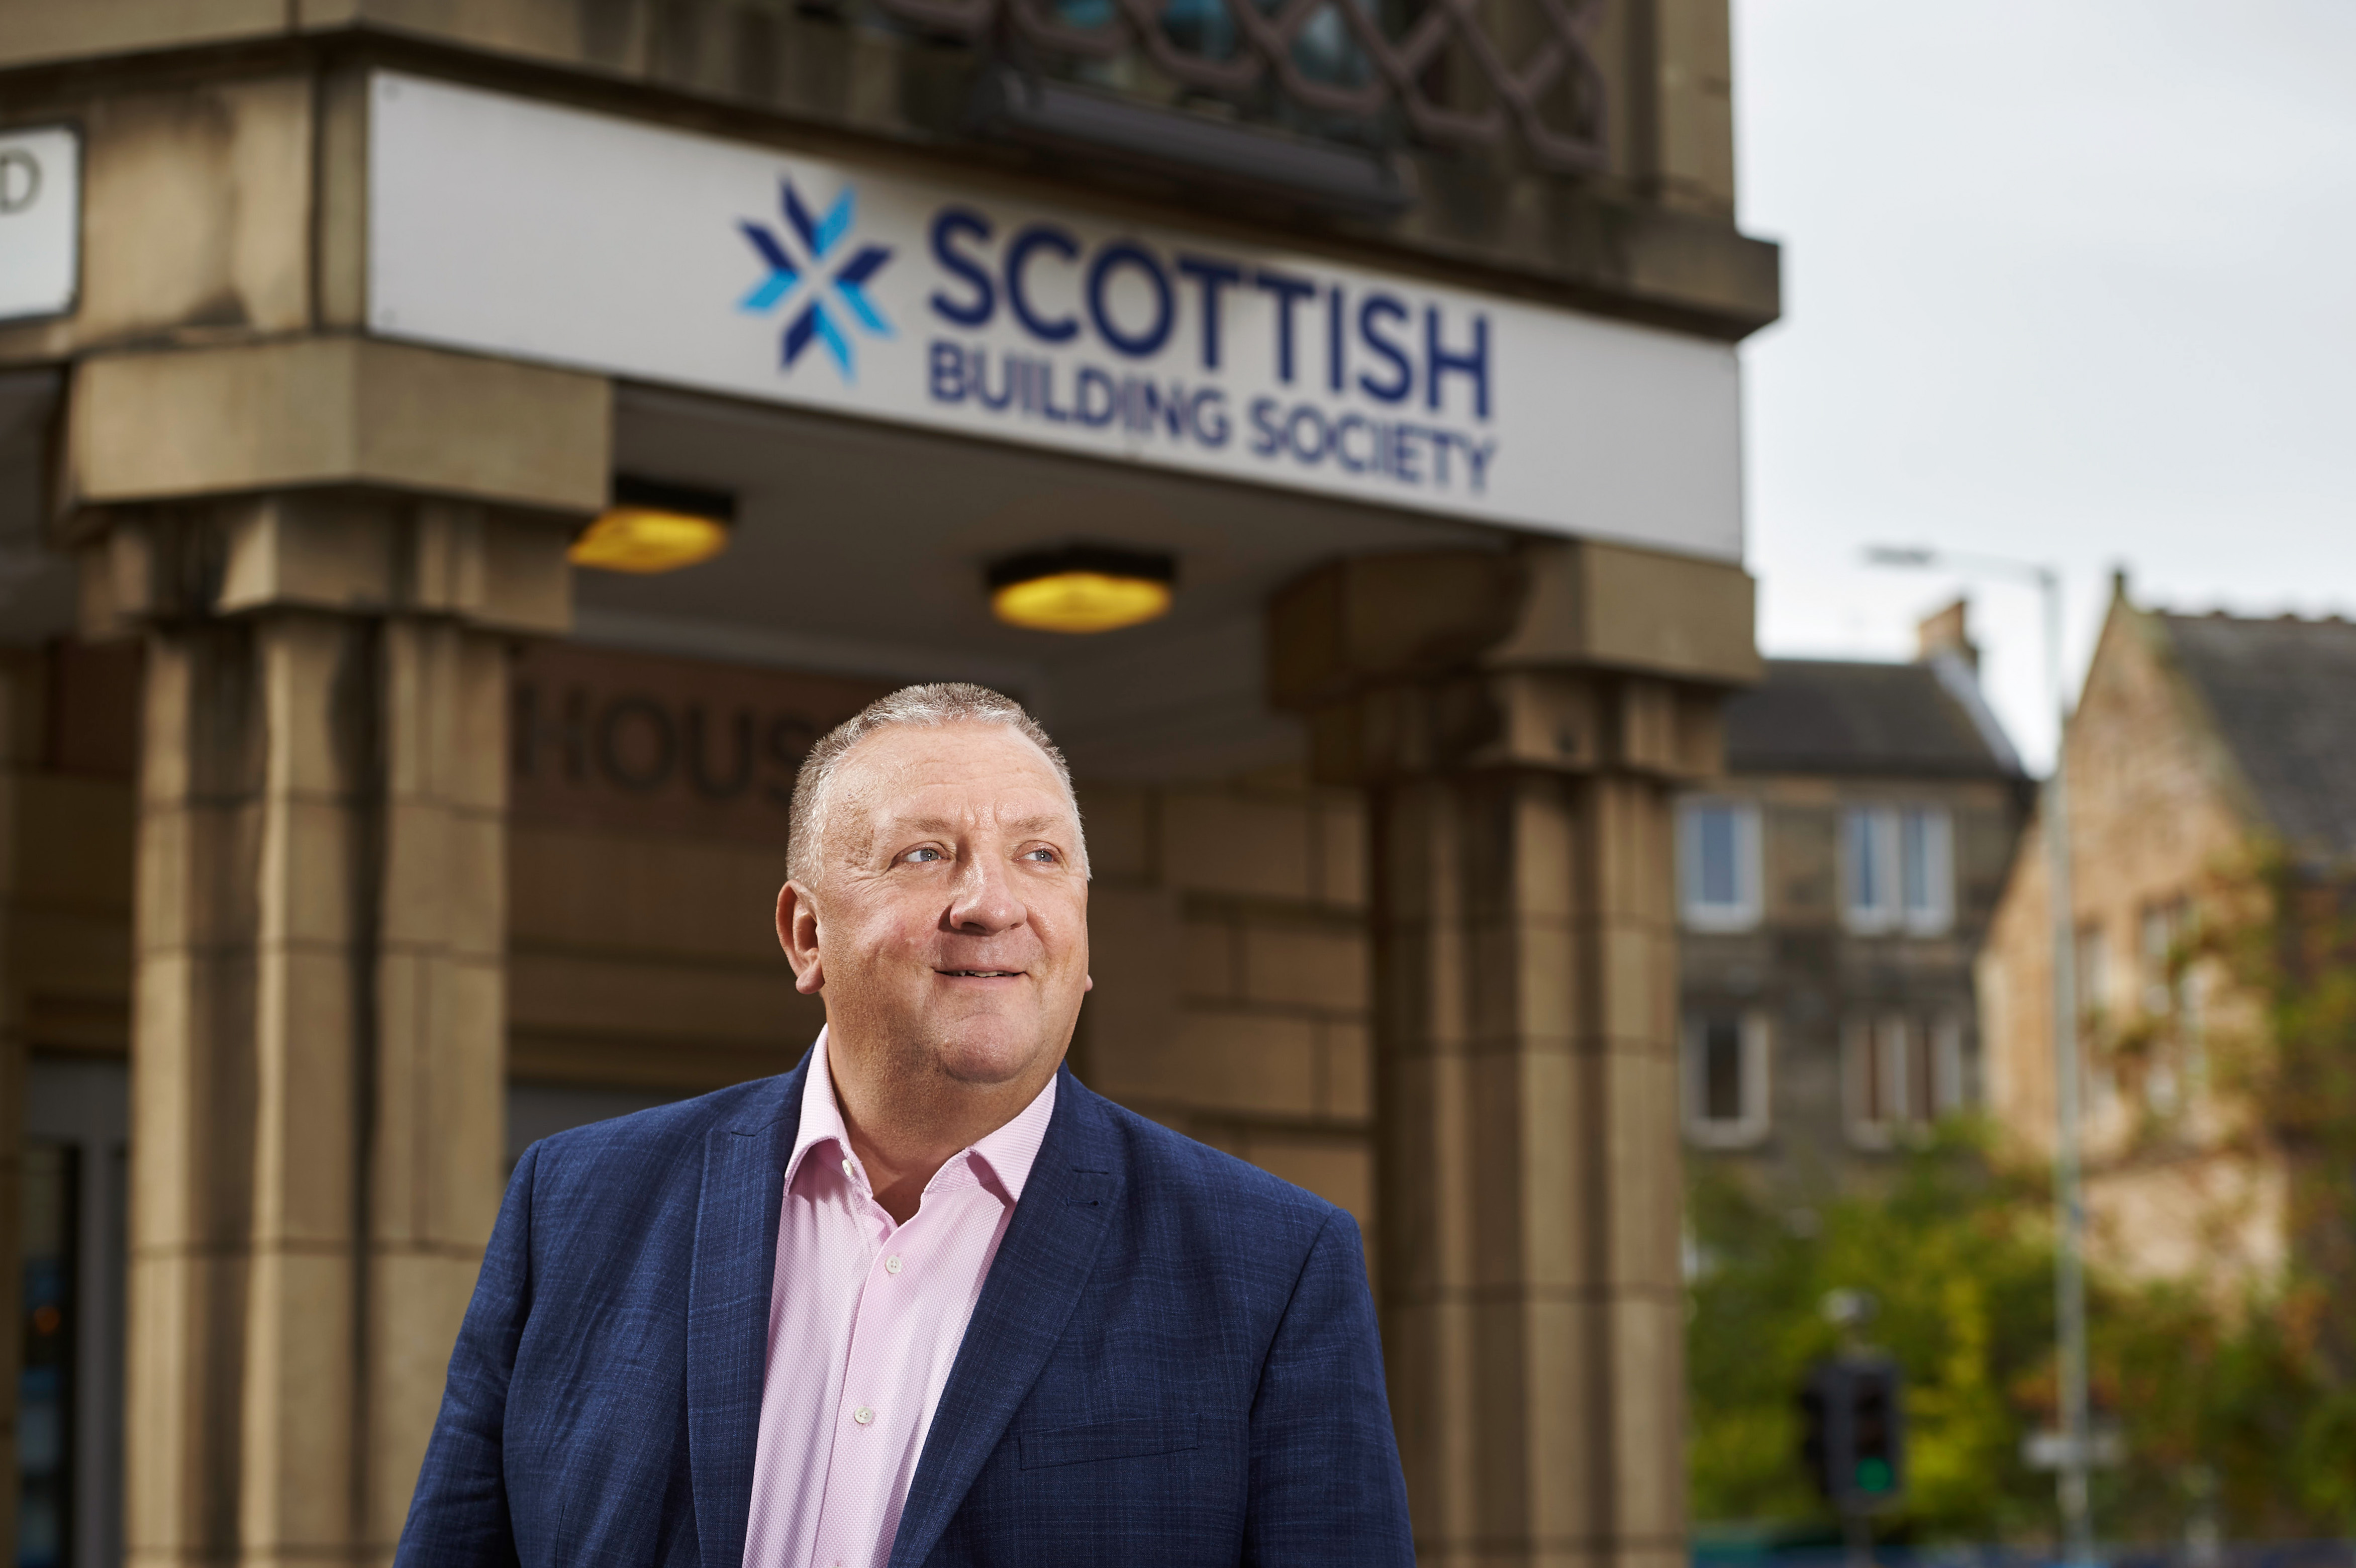 Scottish Building Society chief warns of COVID-19 impact on affordability